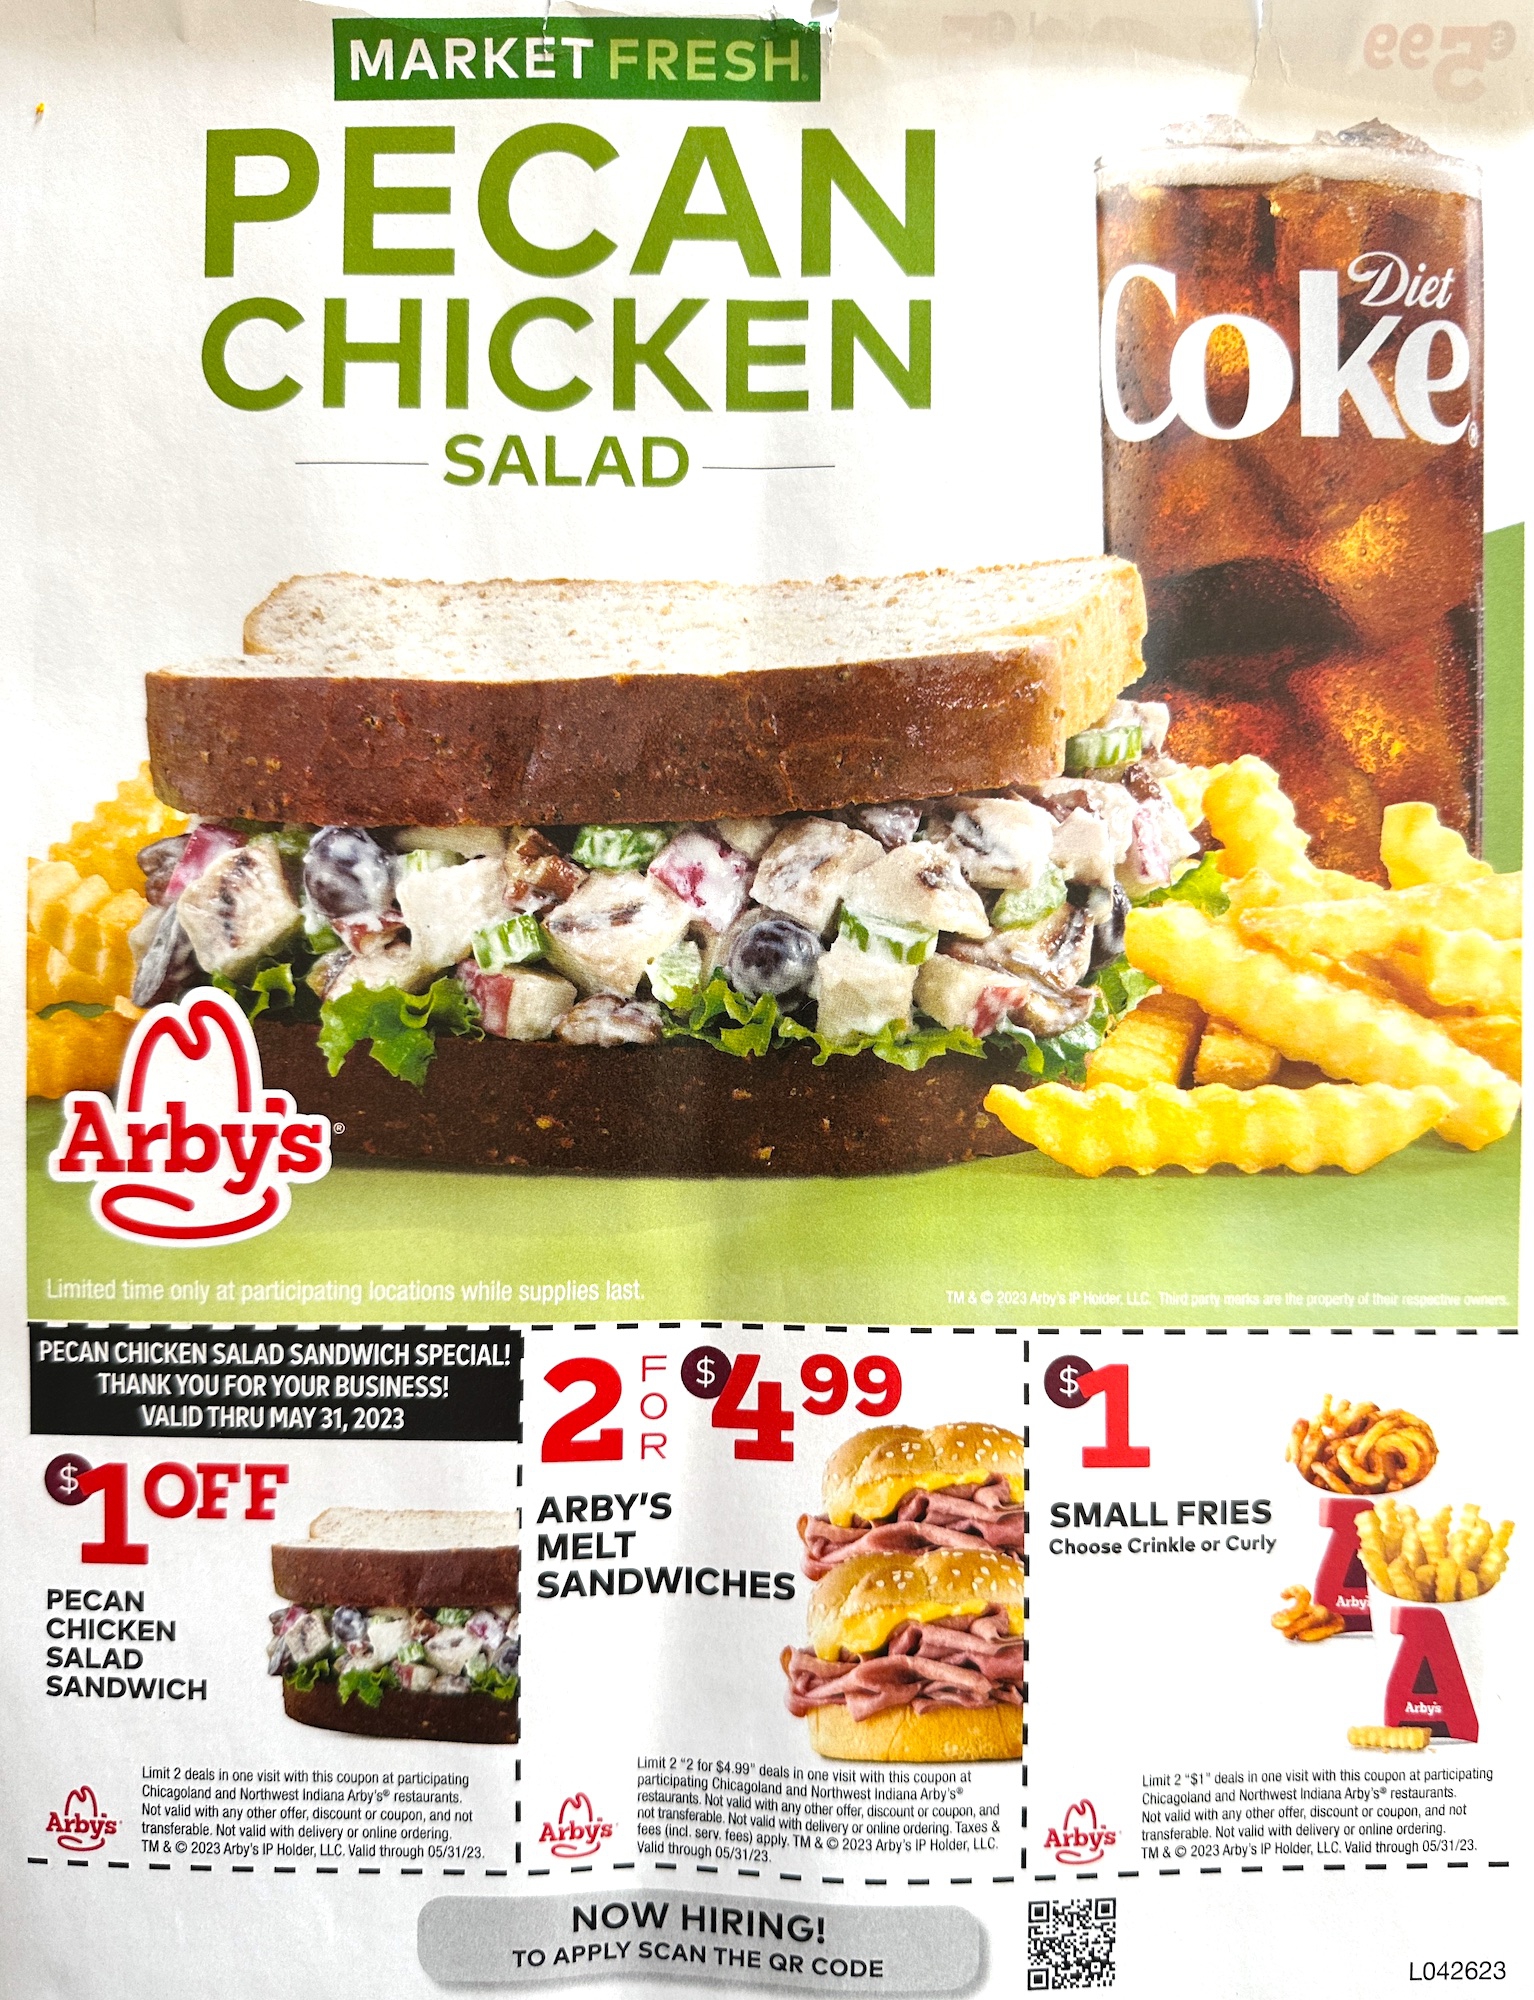 Arby's Printable Coupons (Illinois) - Expires May 31 2023